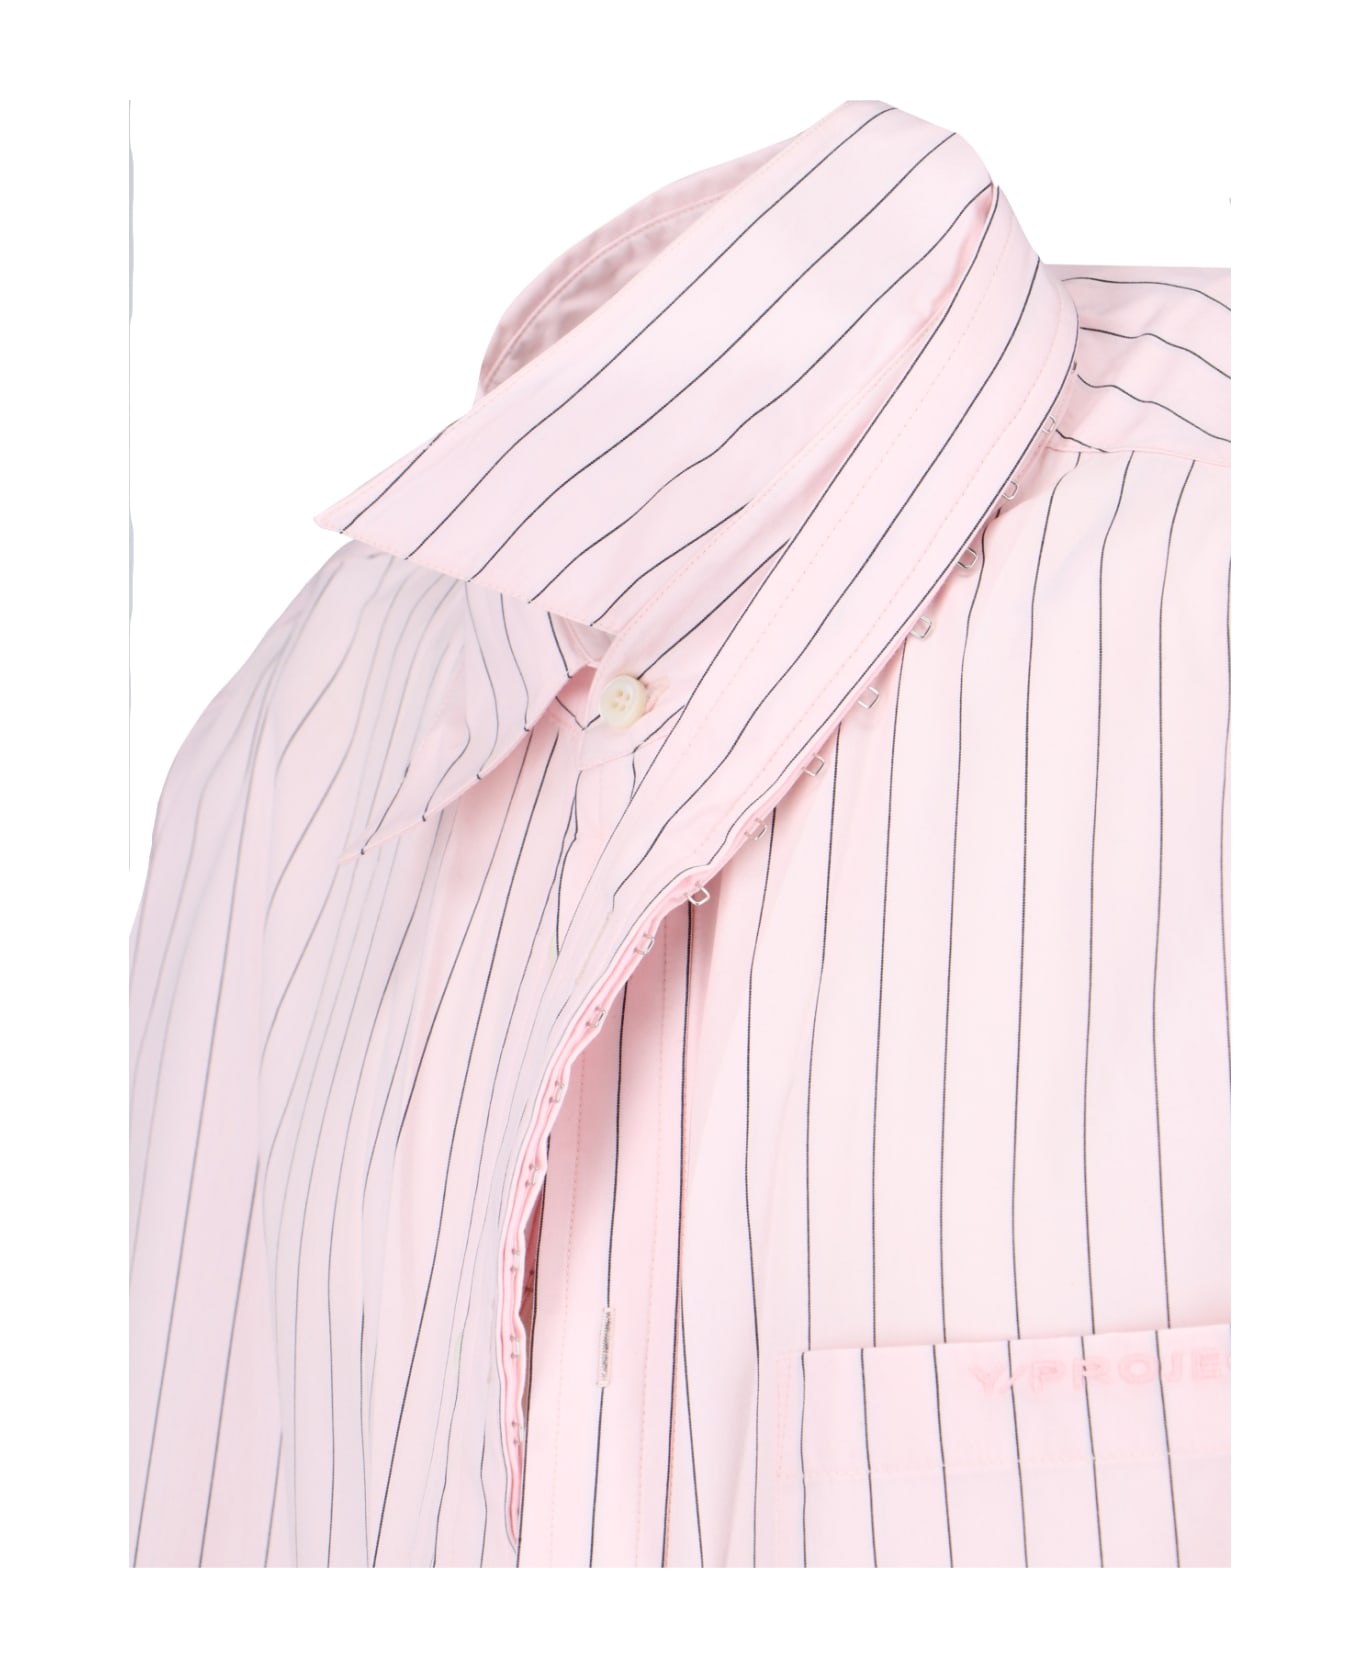 Y/Project Striped Shirt - Pink シャツ